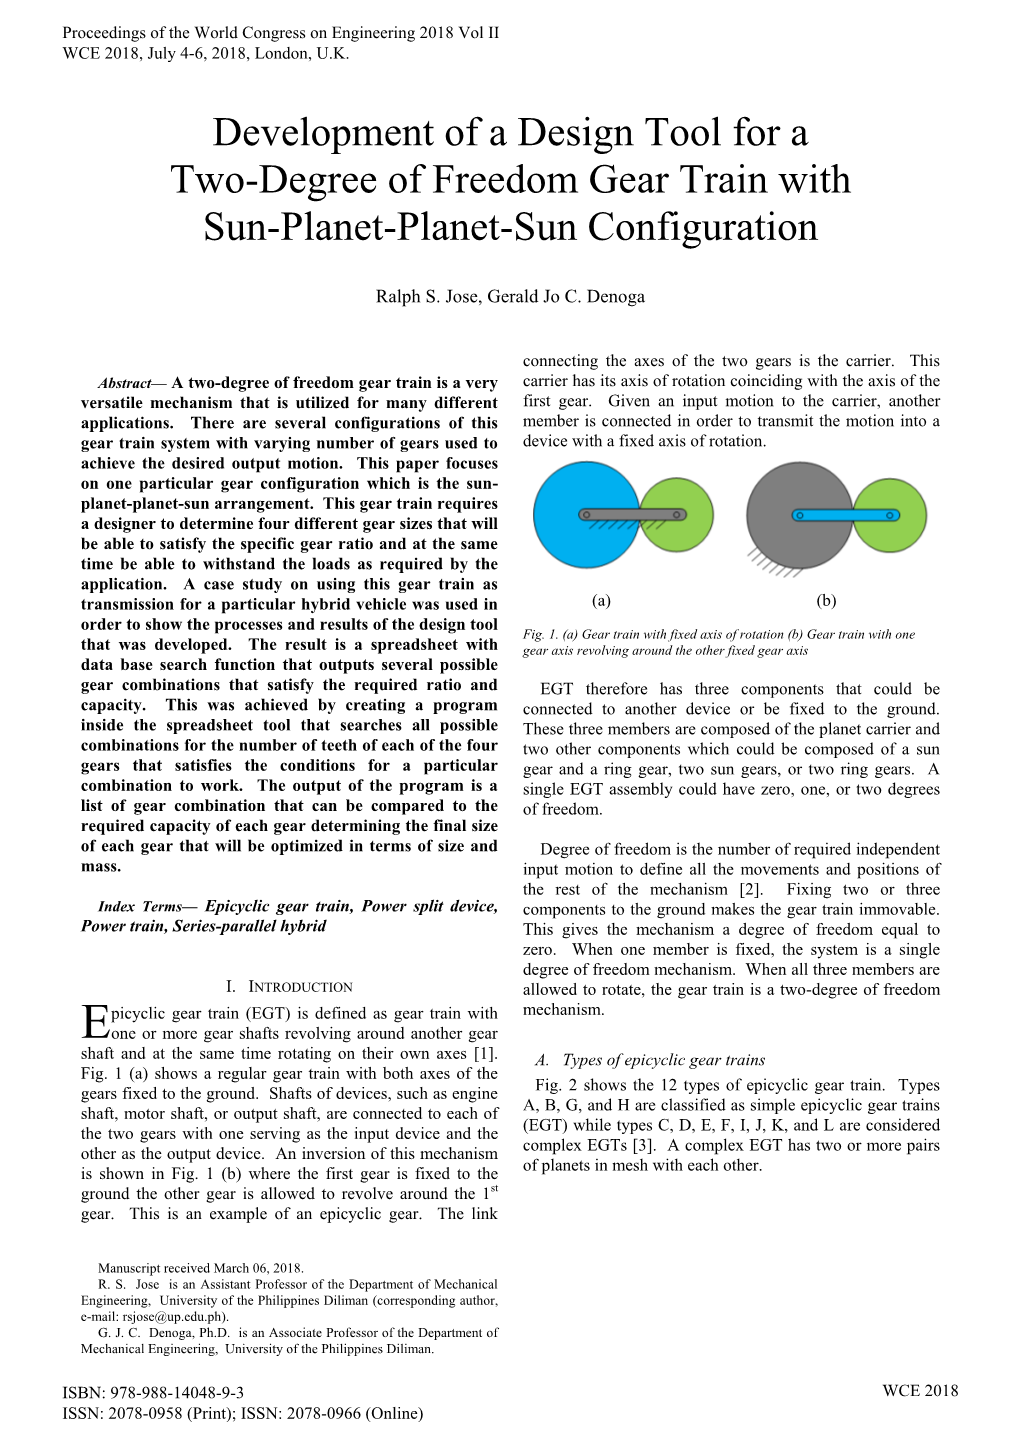 Development of a Design Tool for a Two-Degree of Freedom Gear Train with Sun-Planet-Planet-Sun Configuration